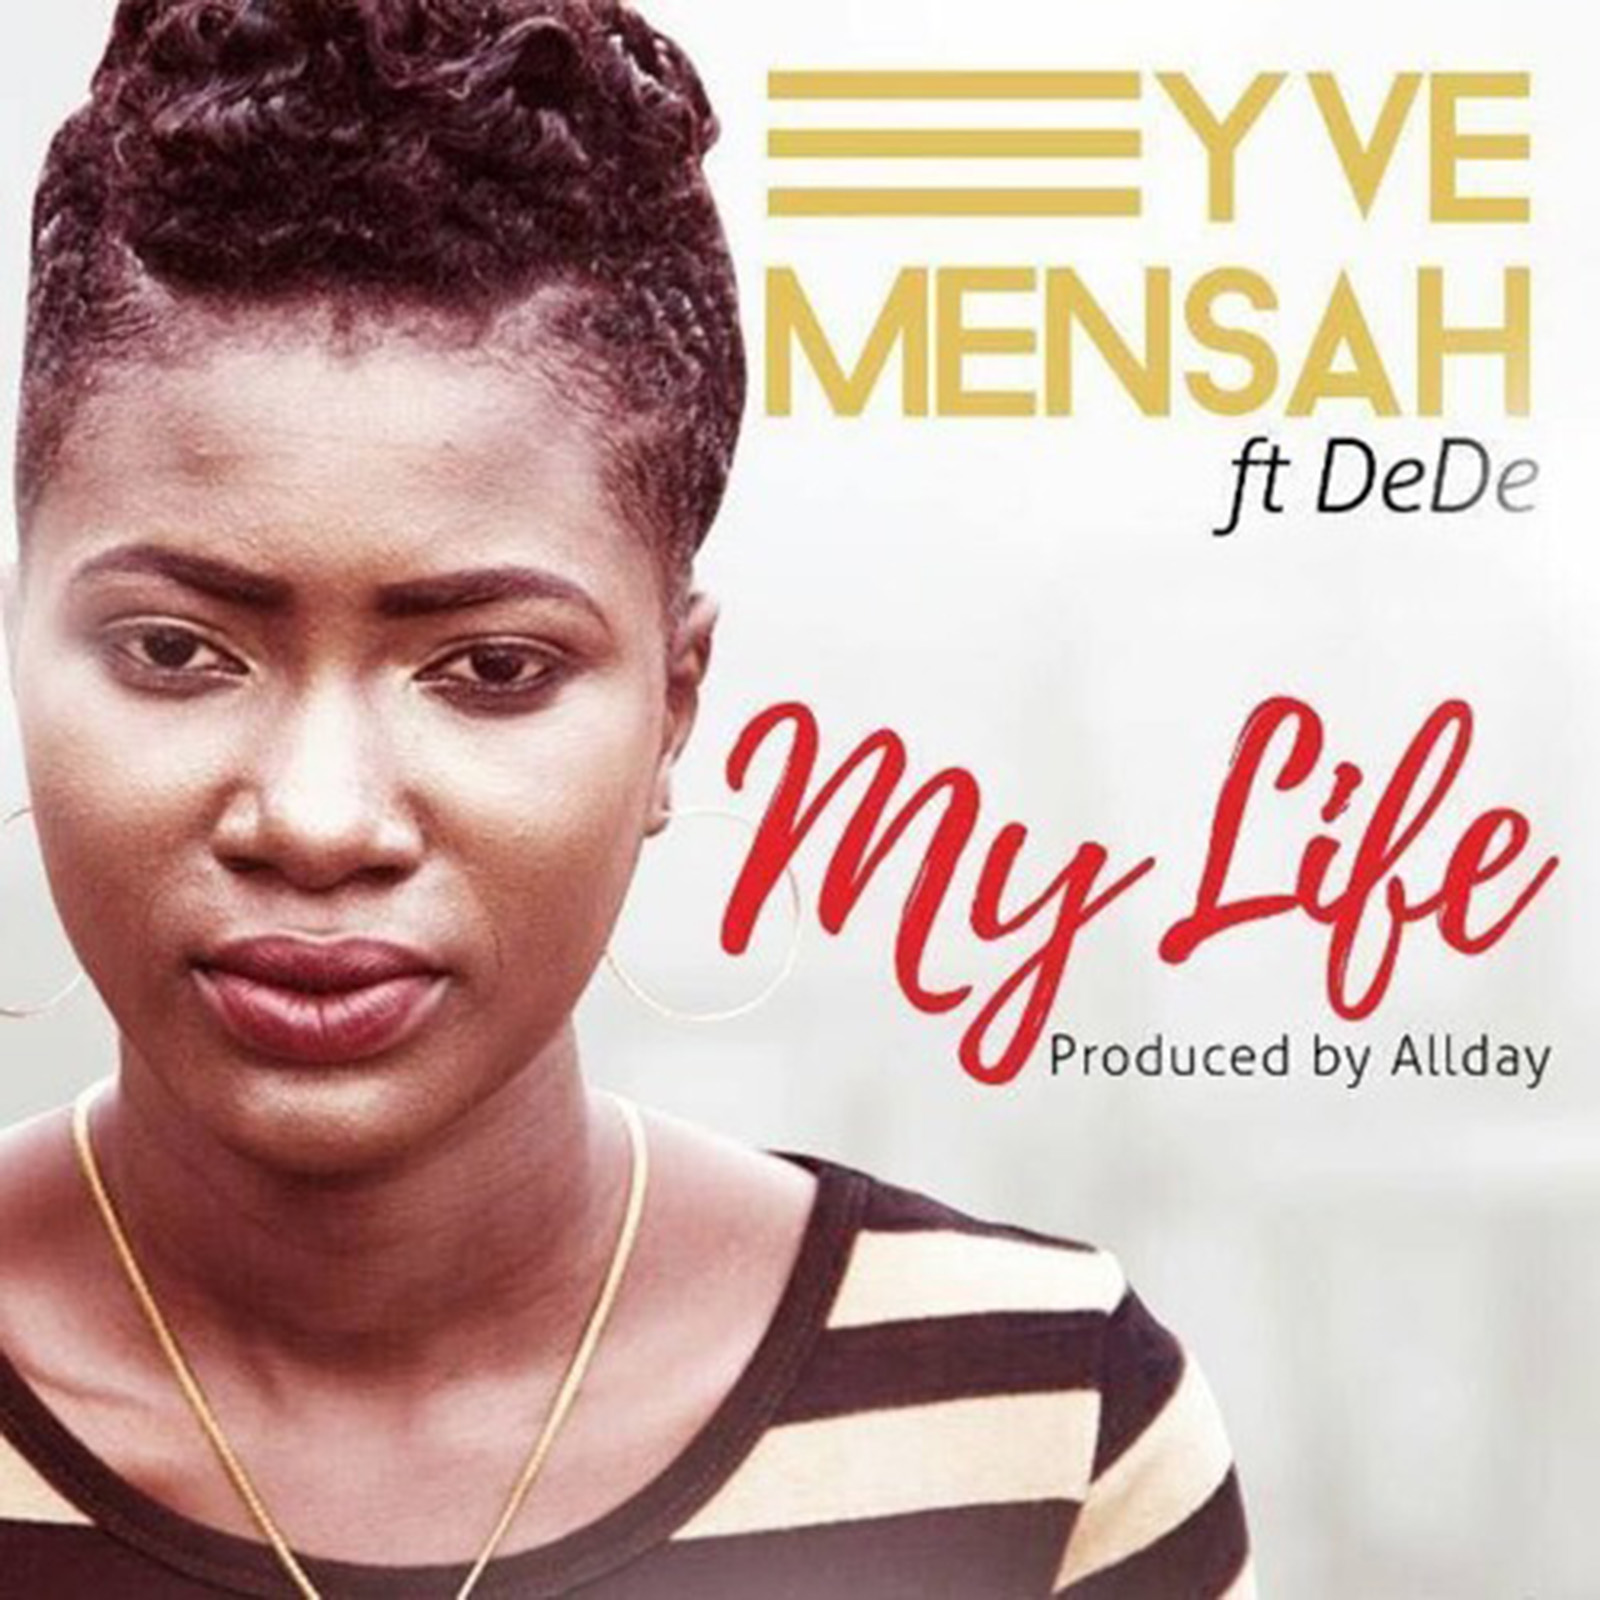 My Life by Yve Mensah feat. Dede